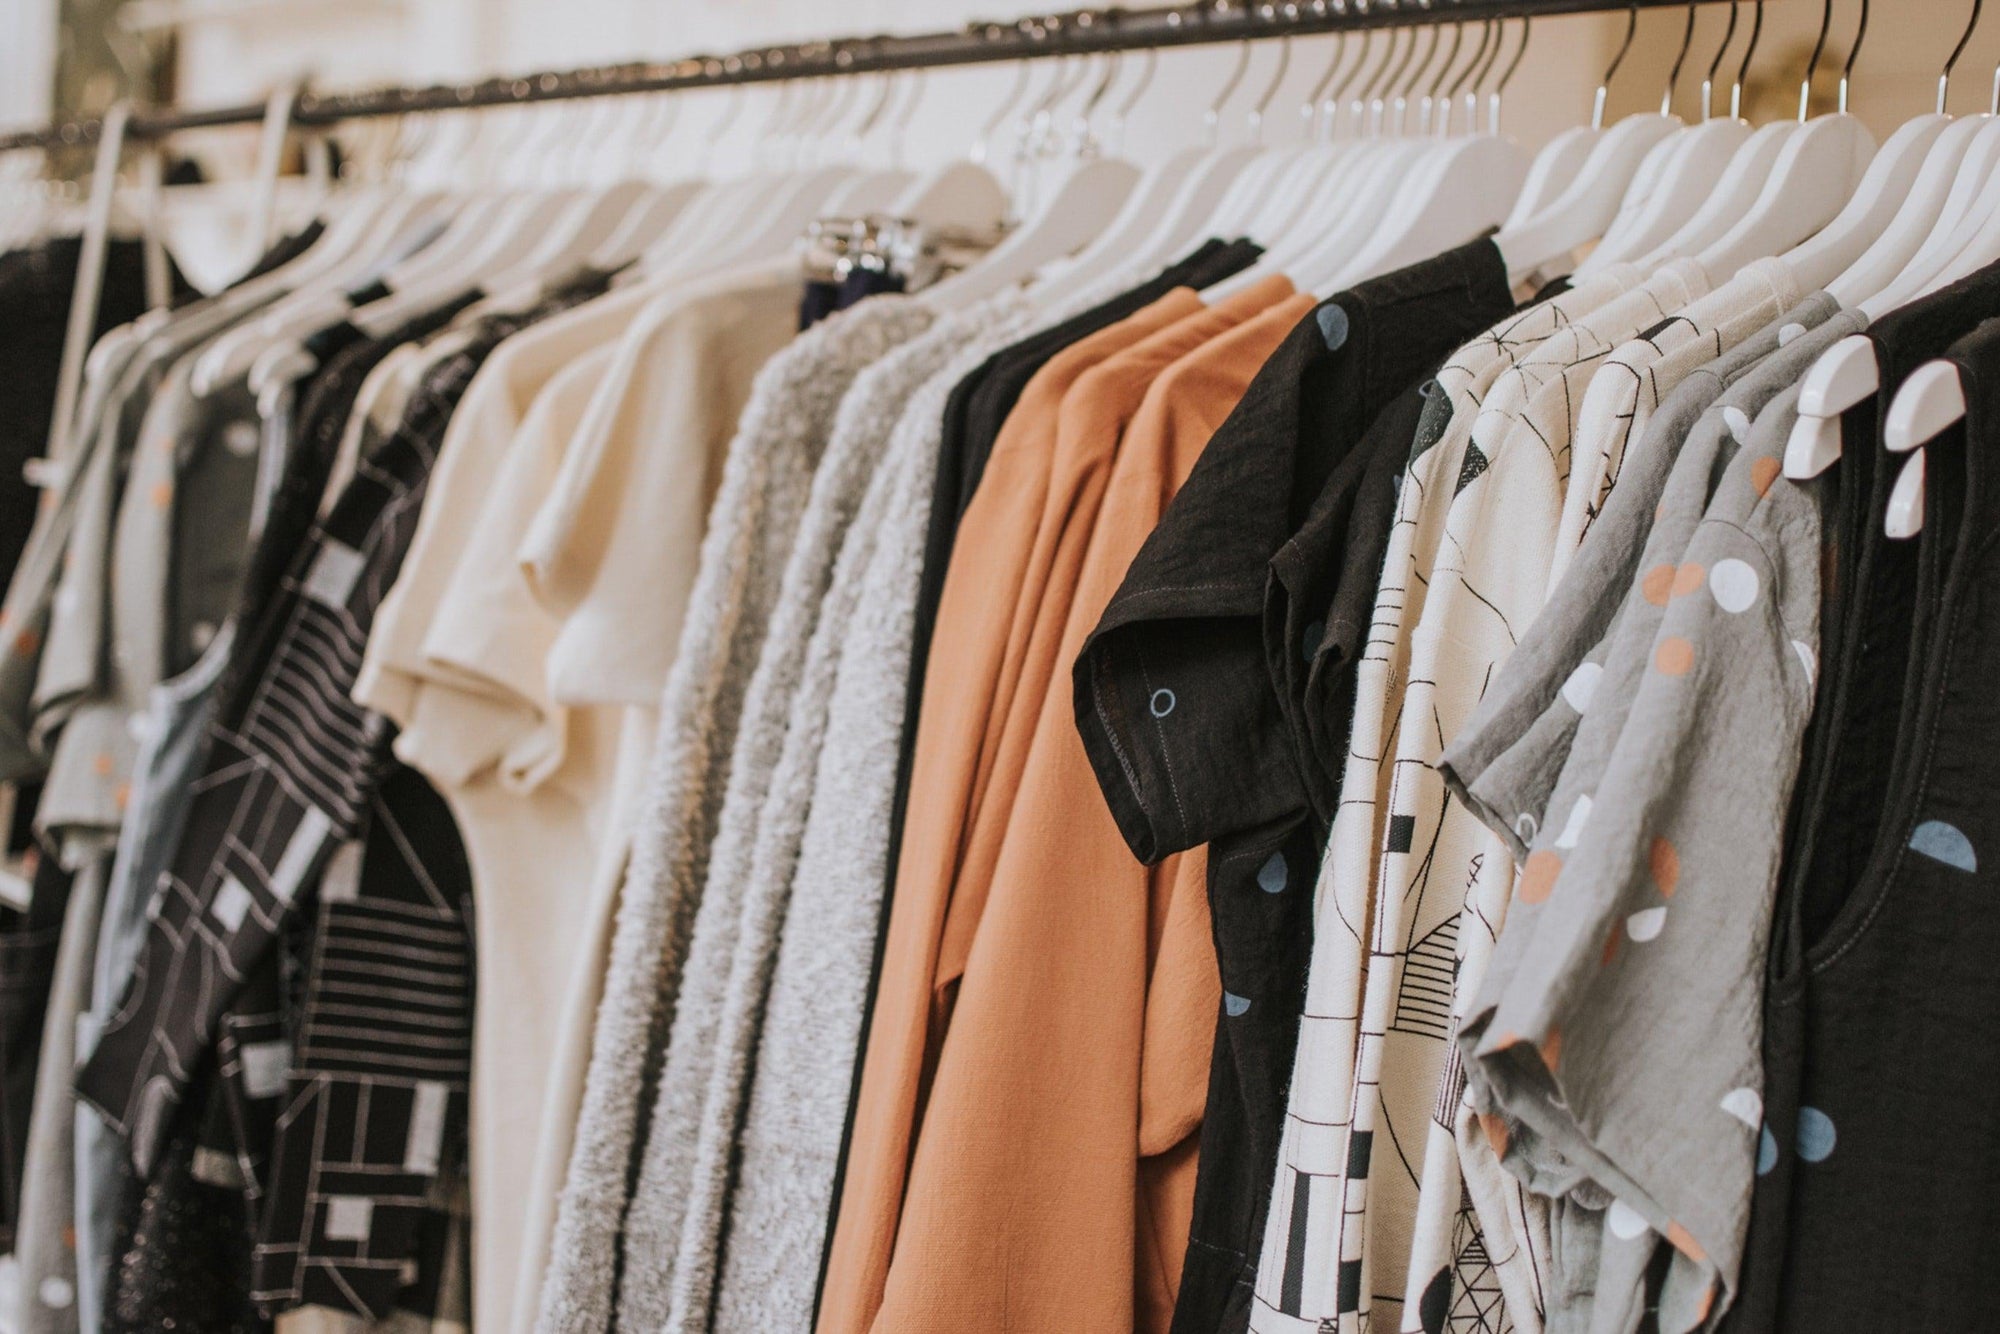 How to Sustainably Shop for Clothing